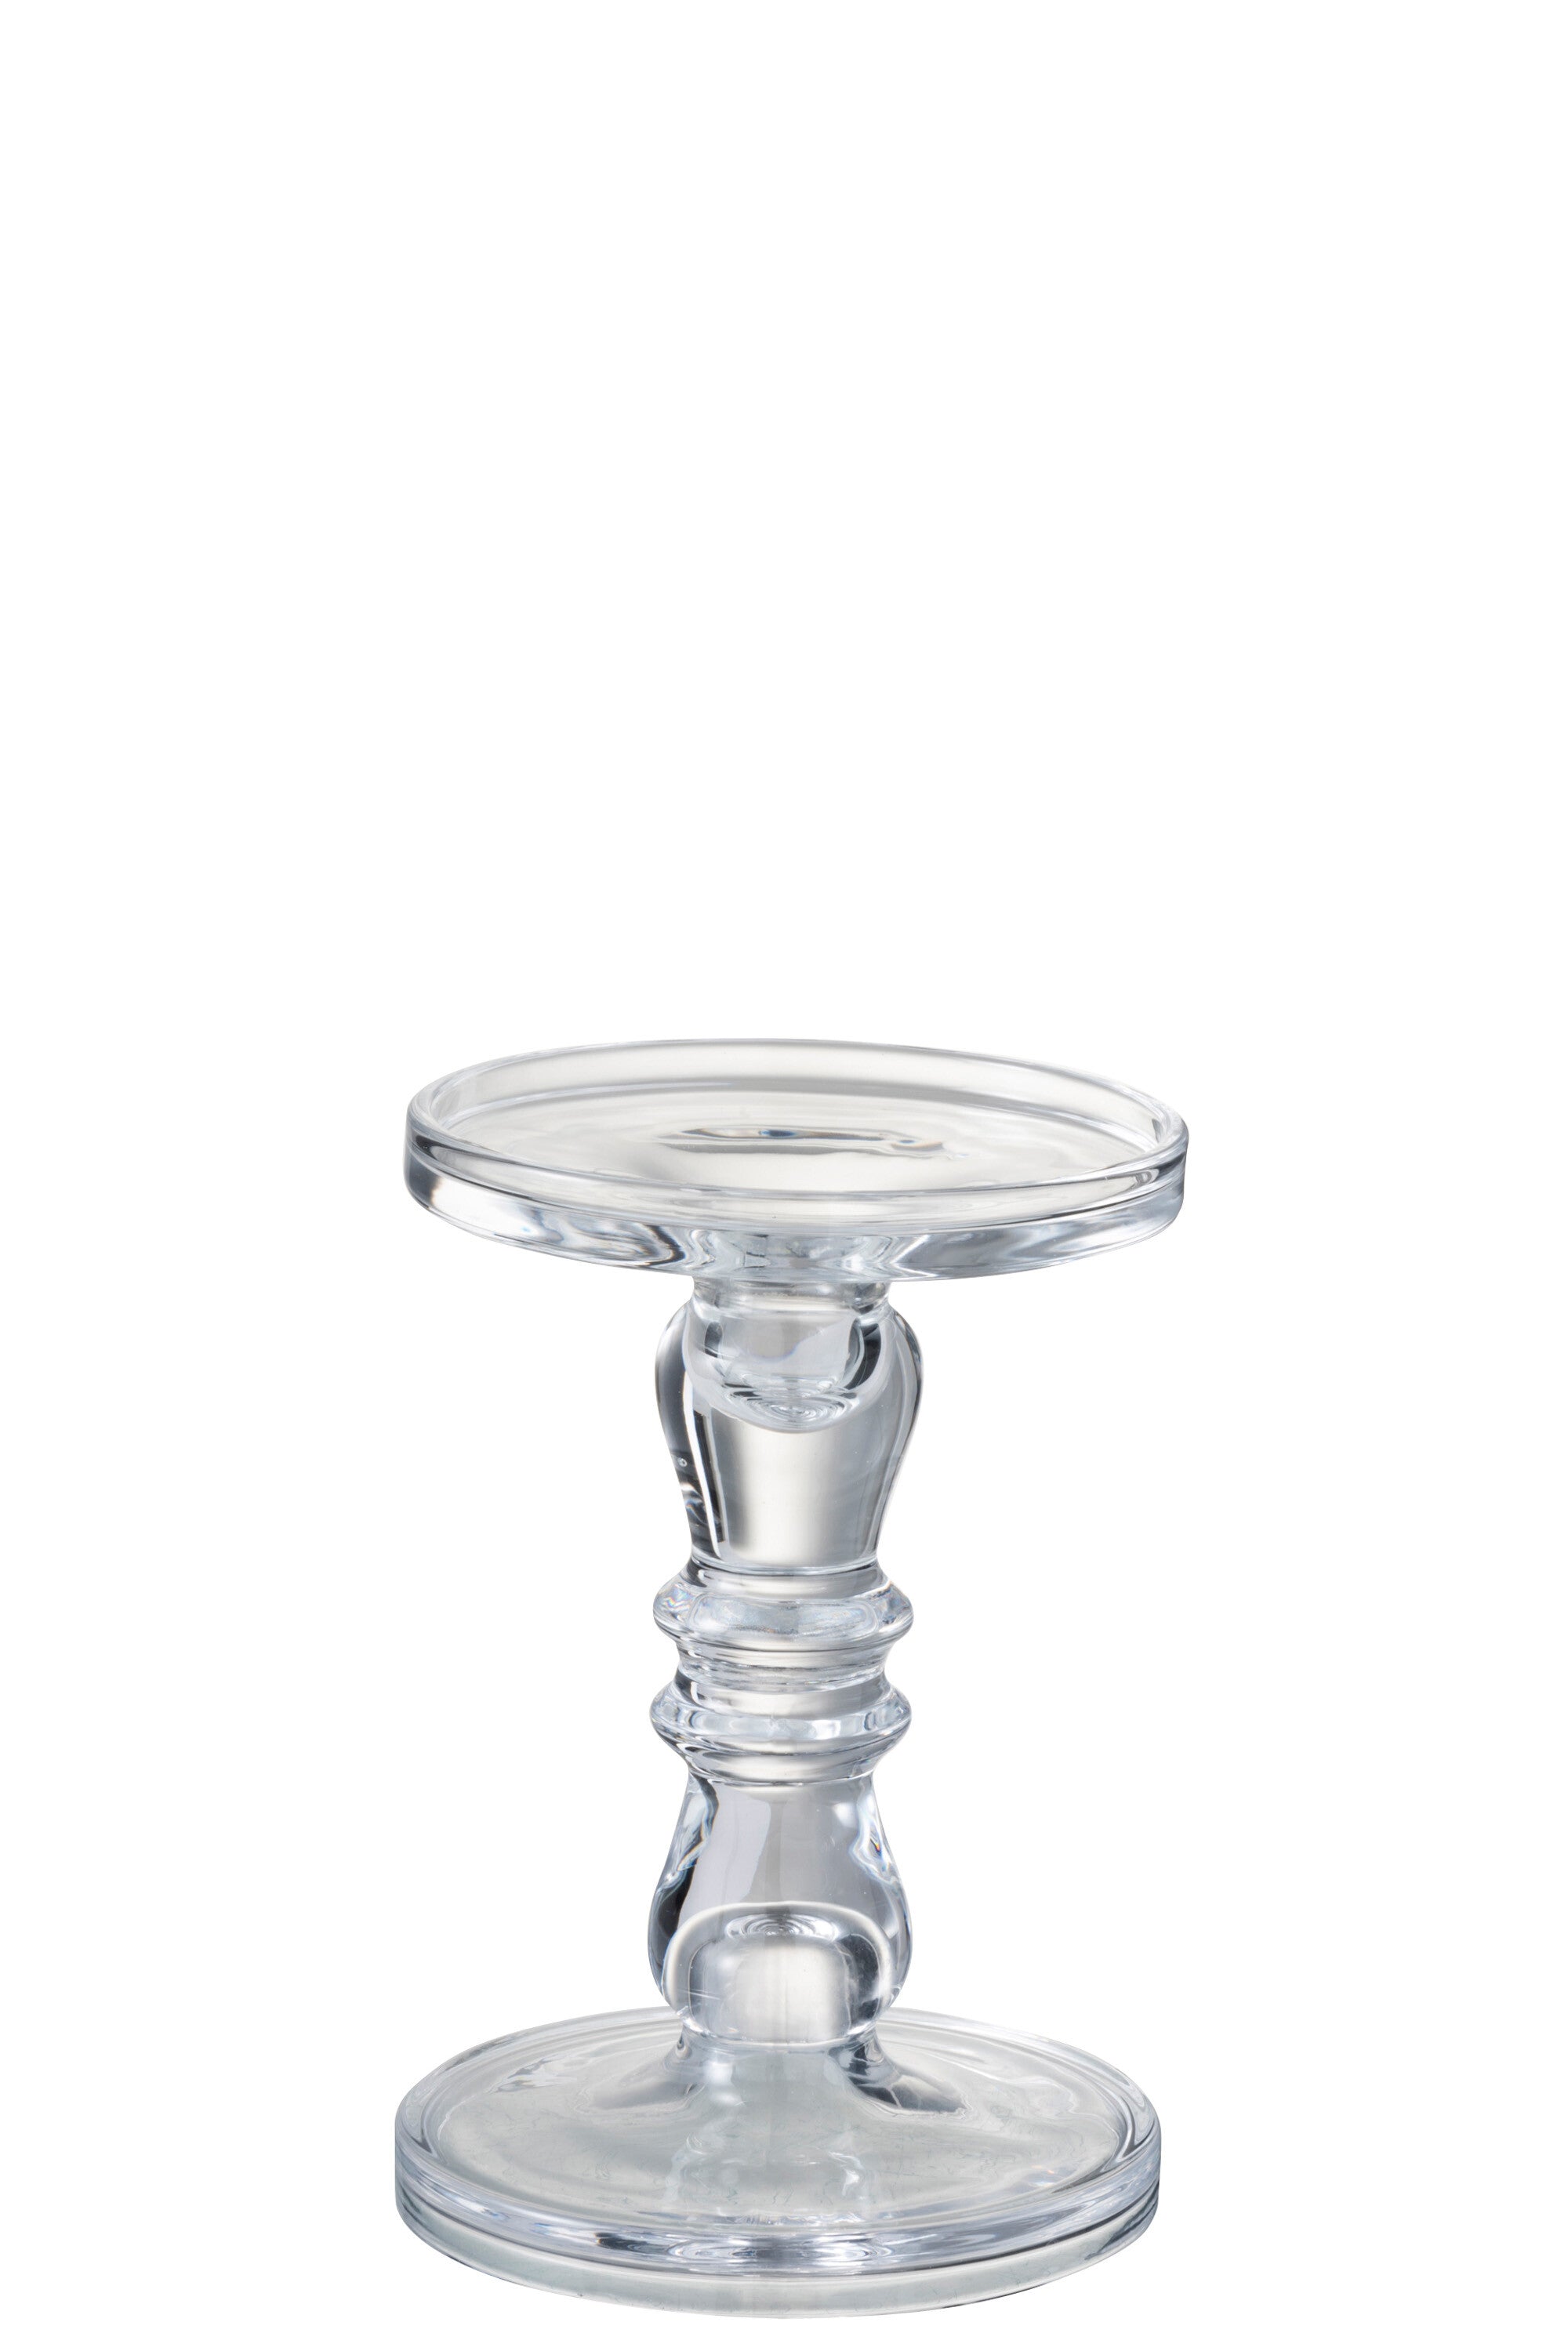 Christmas | Small Glass Candlestick by Weirs of Baggot Street